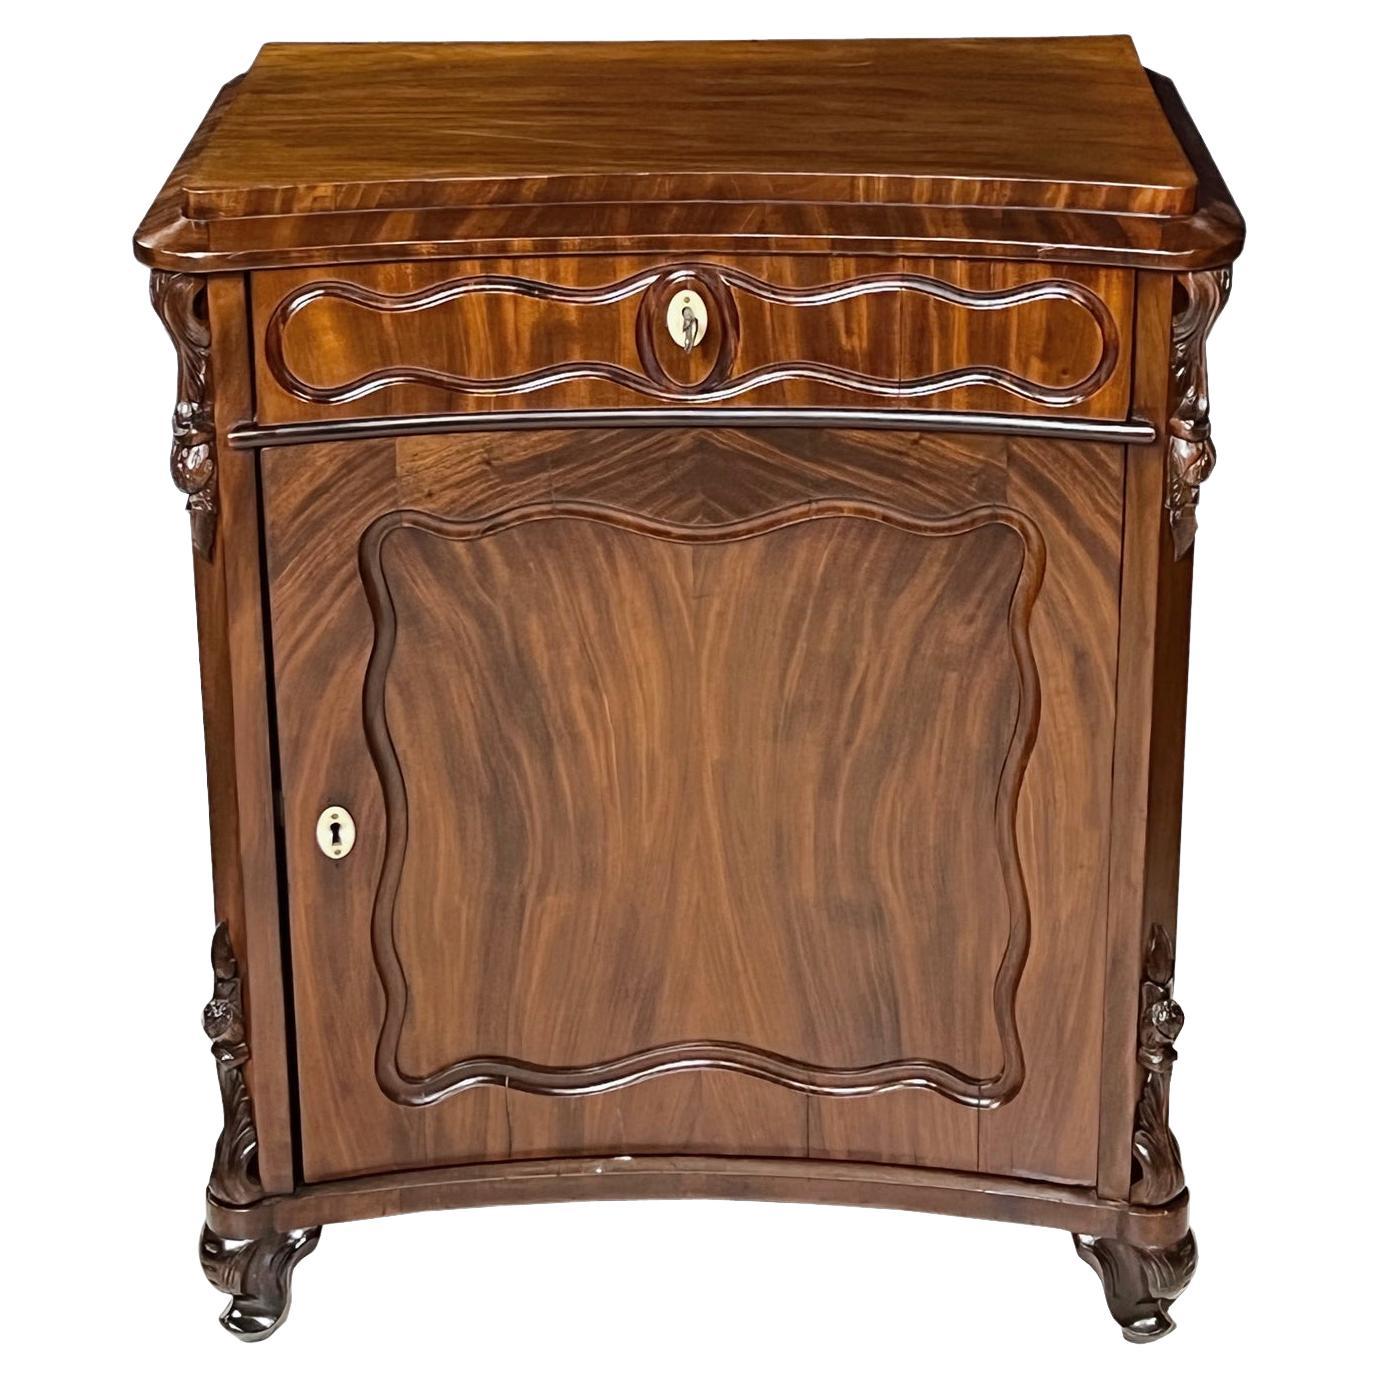 Antique Louis Philippe Nightstand/Table in West Indies Mahogany w/ Concave Front